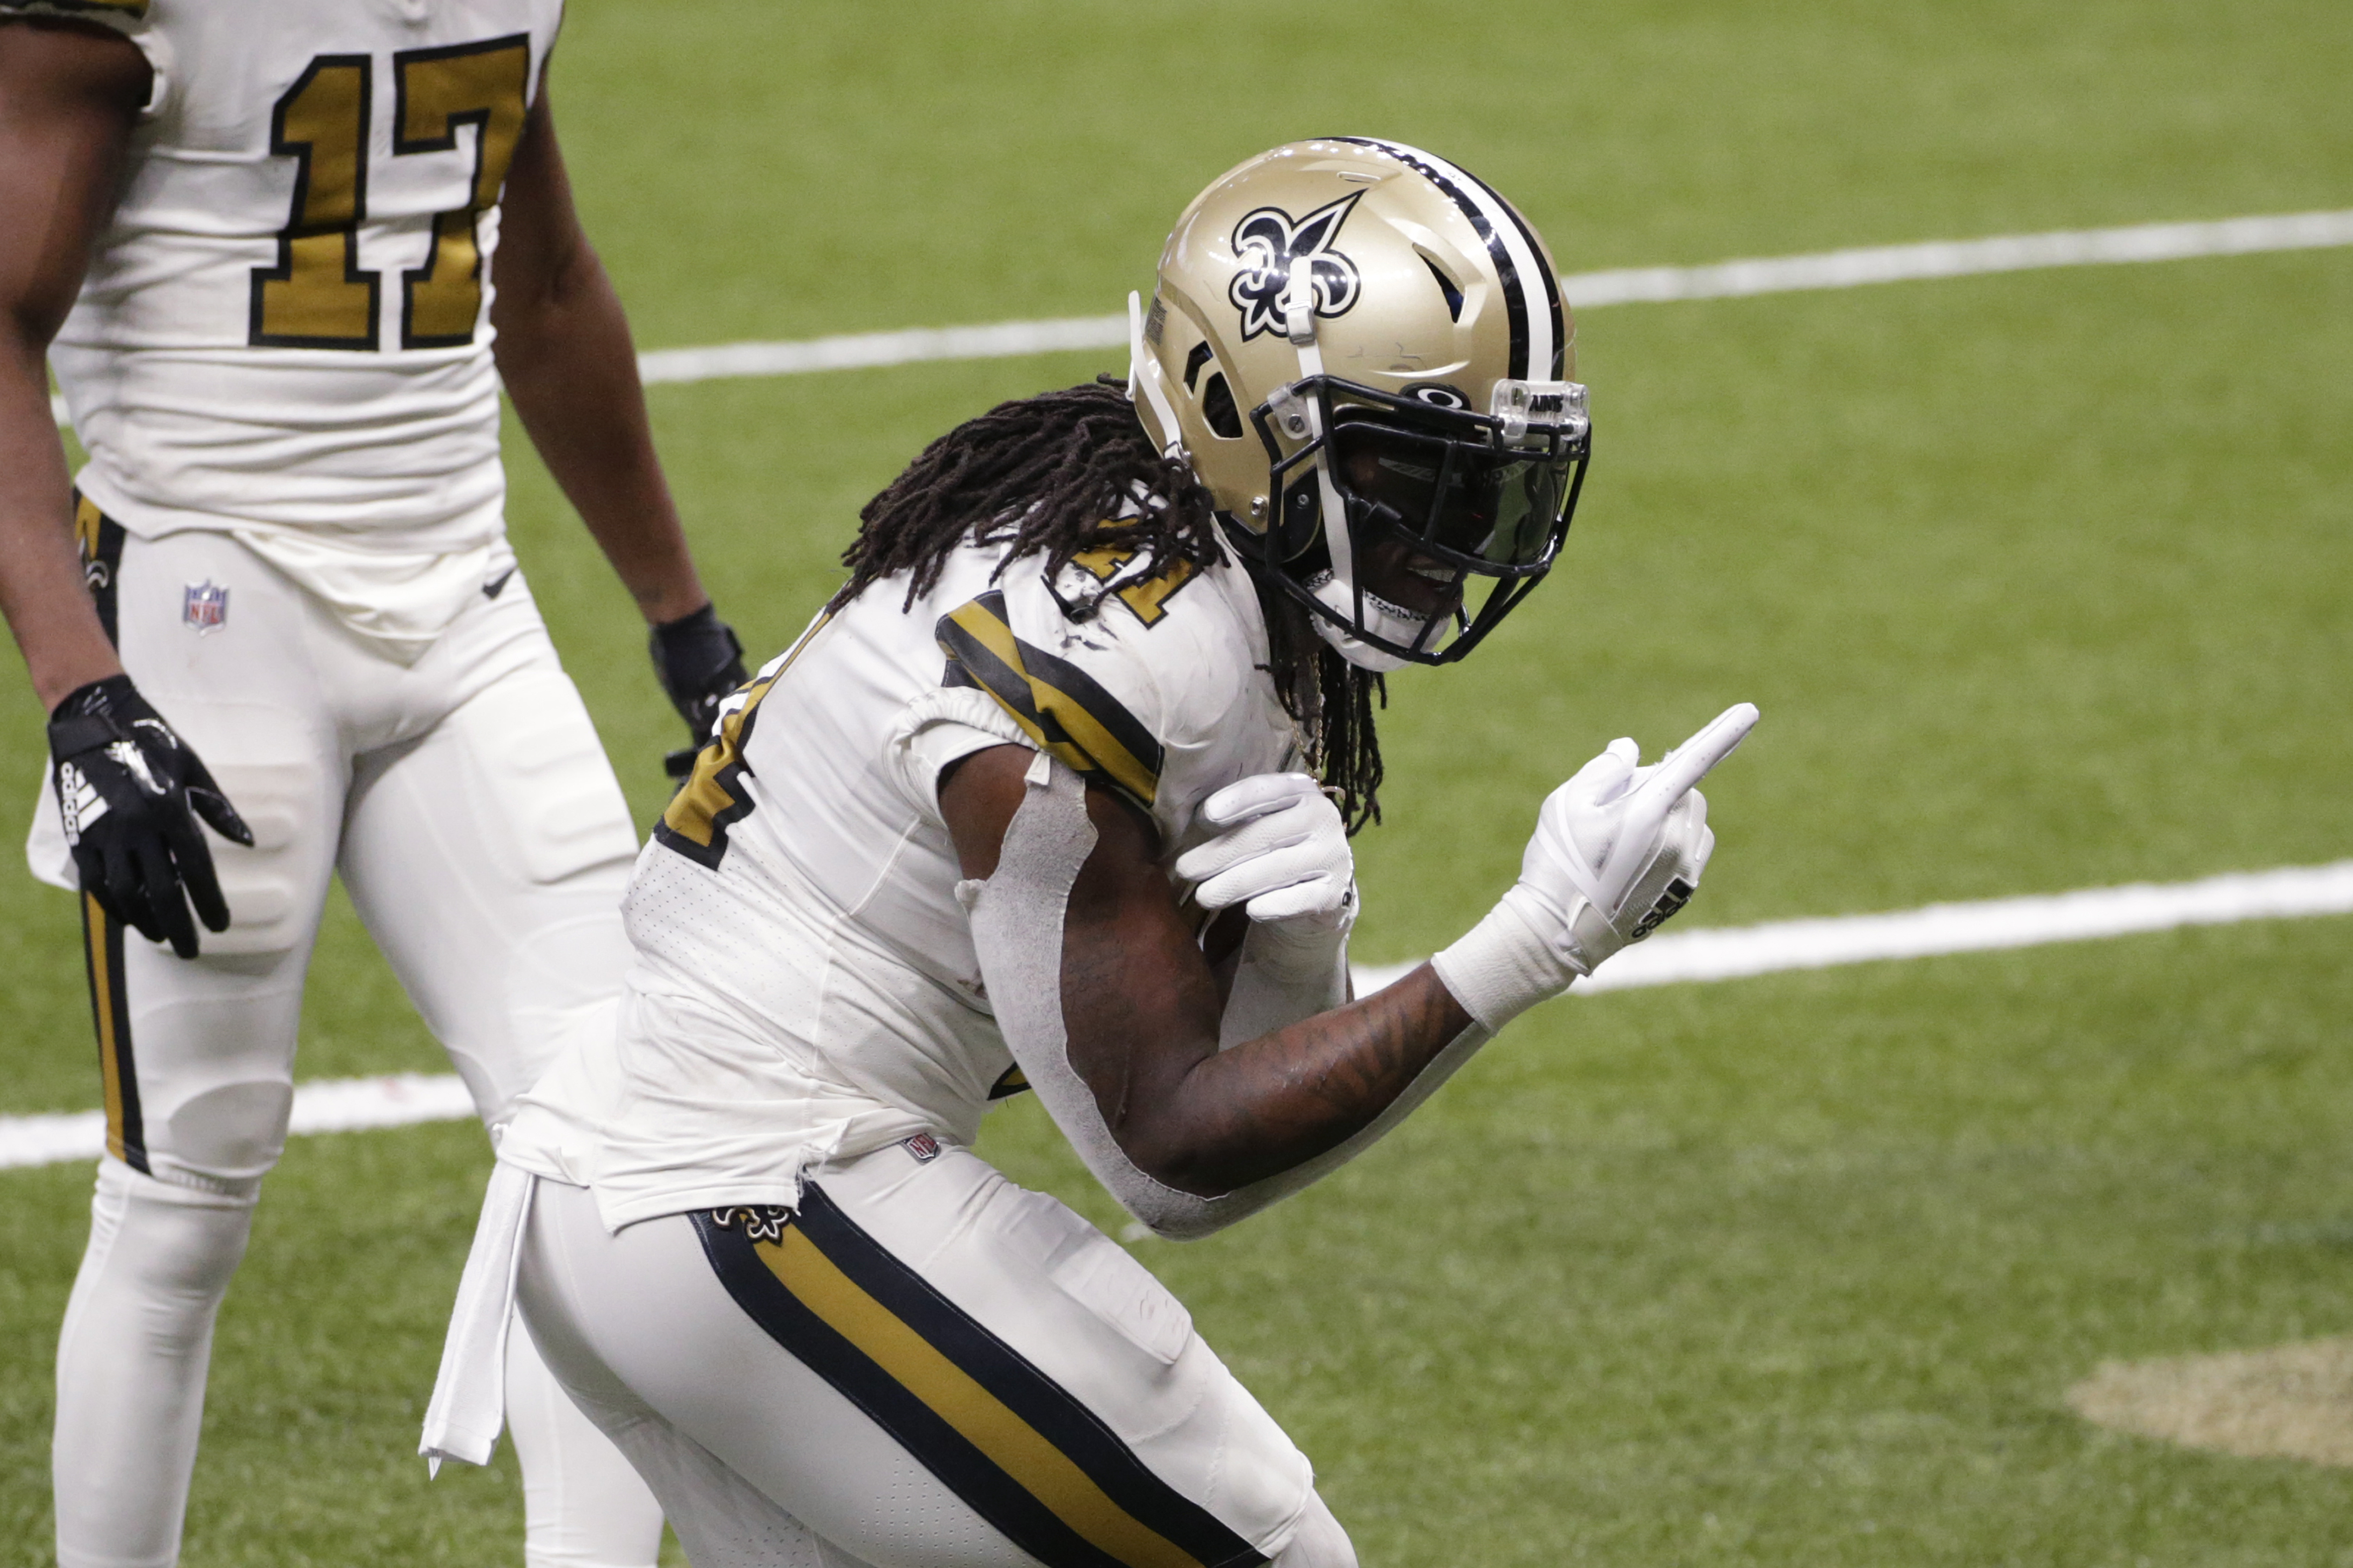 Saints clinch NFC South title, Kamara scores six TDs in win over Vikings